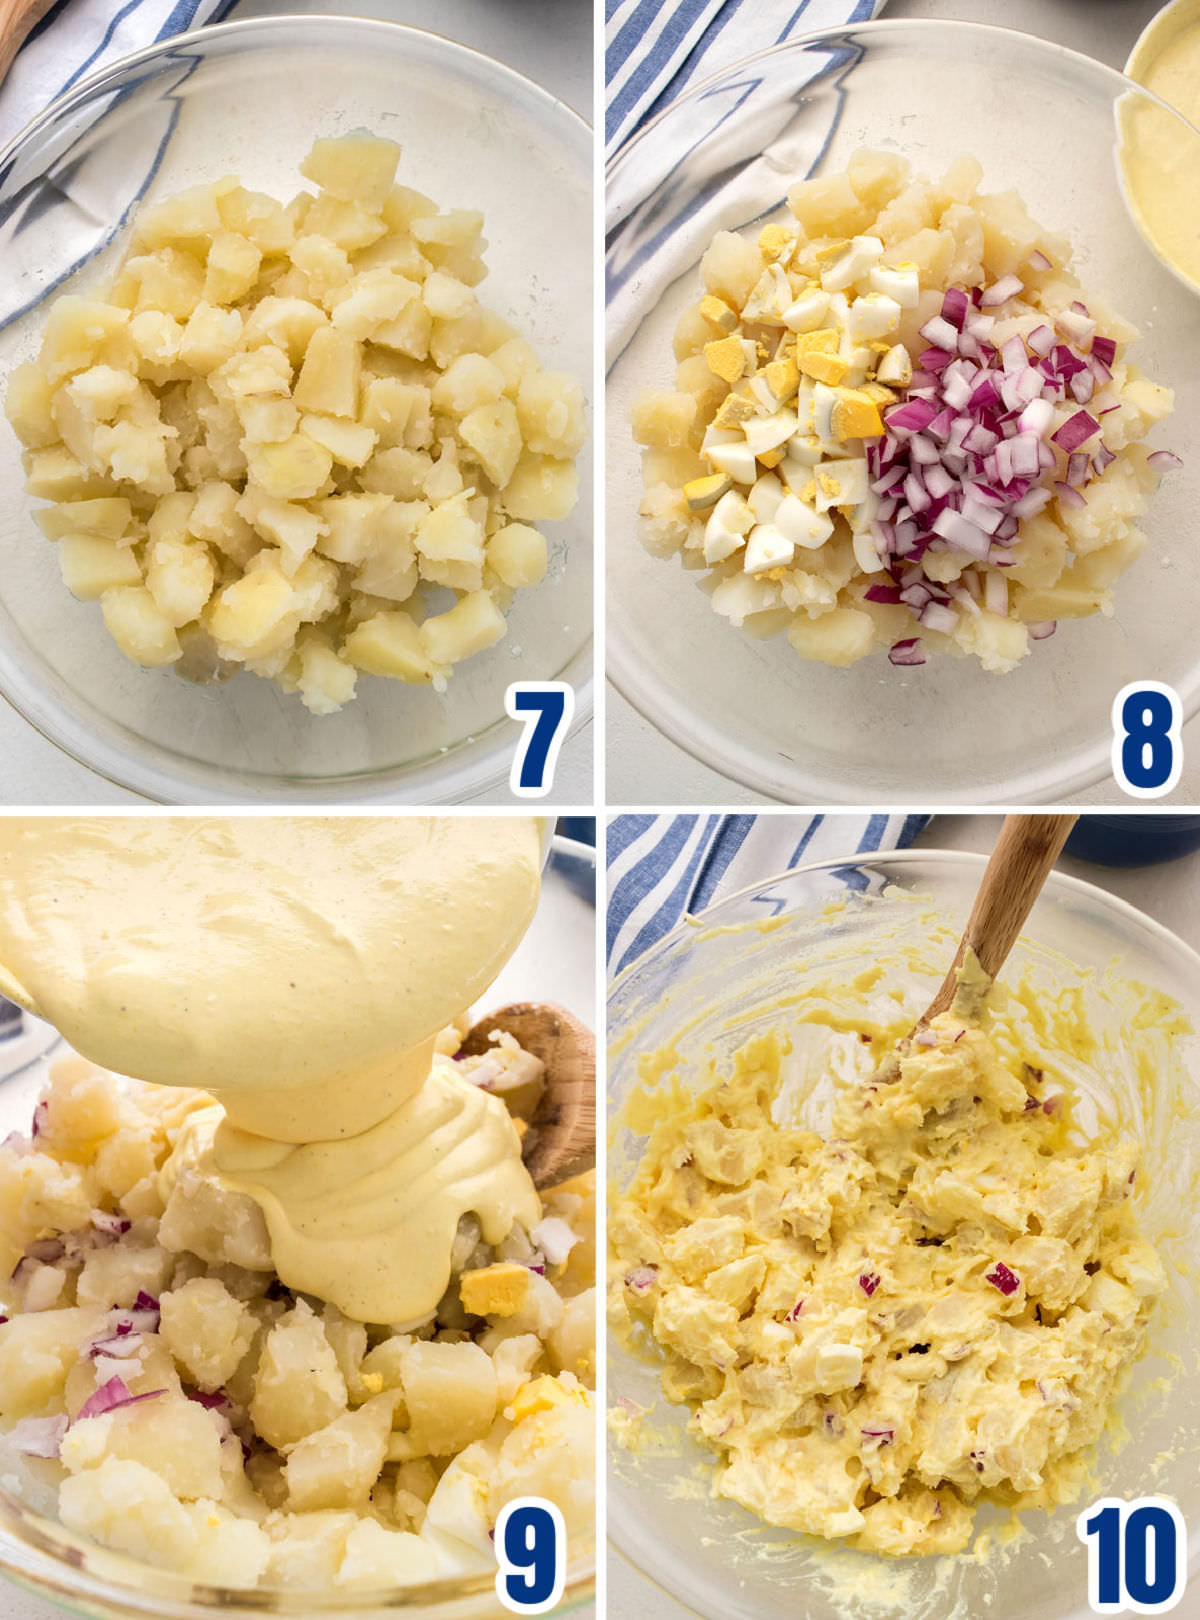 Collage image showing the steps required to assembling the salad.